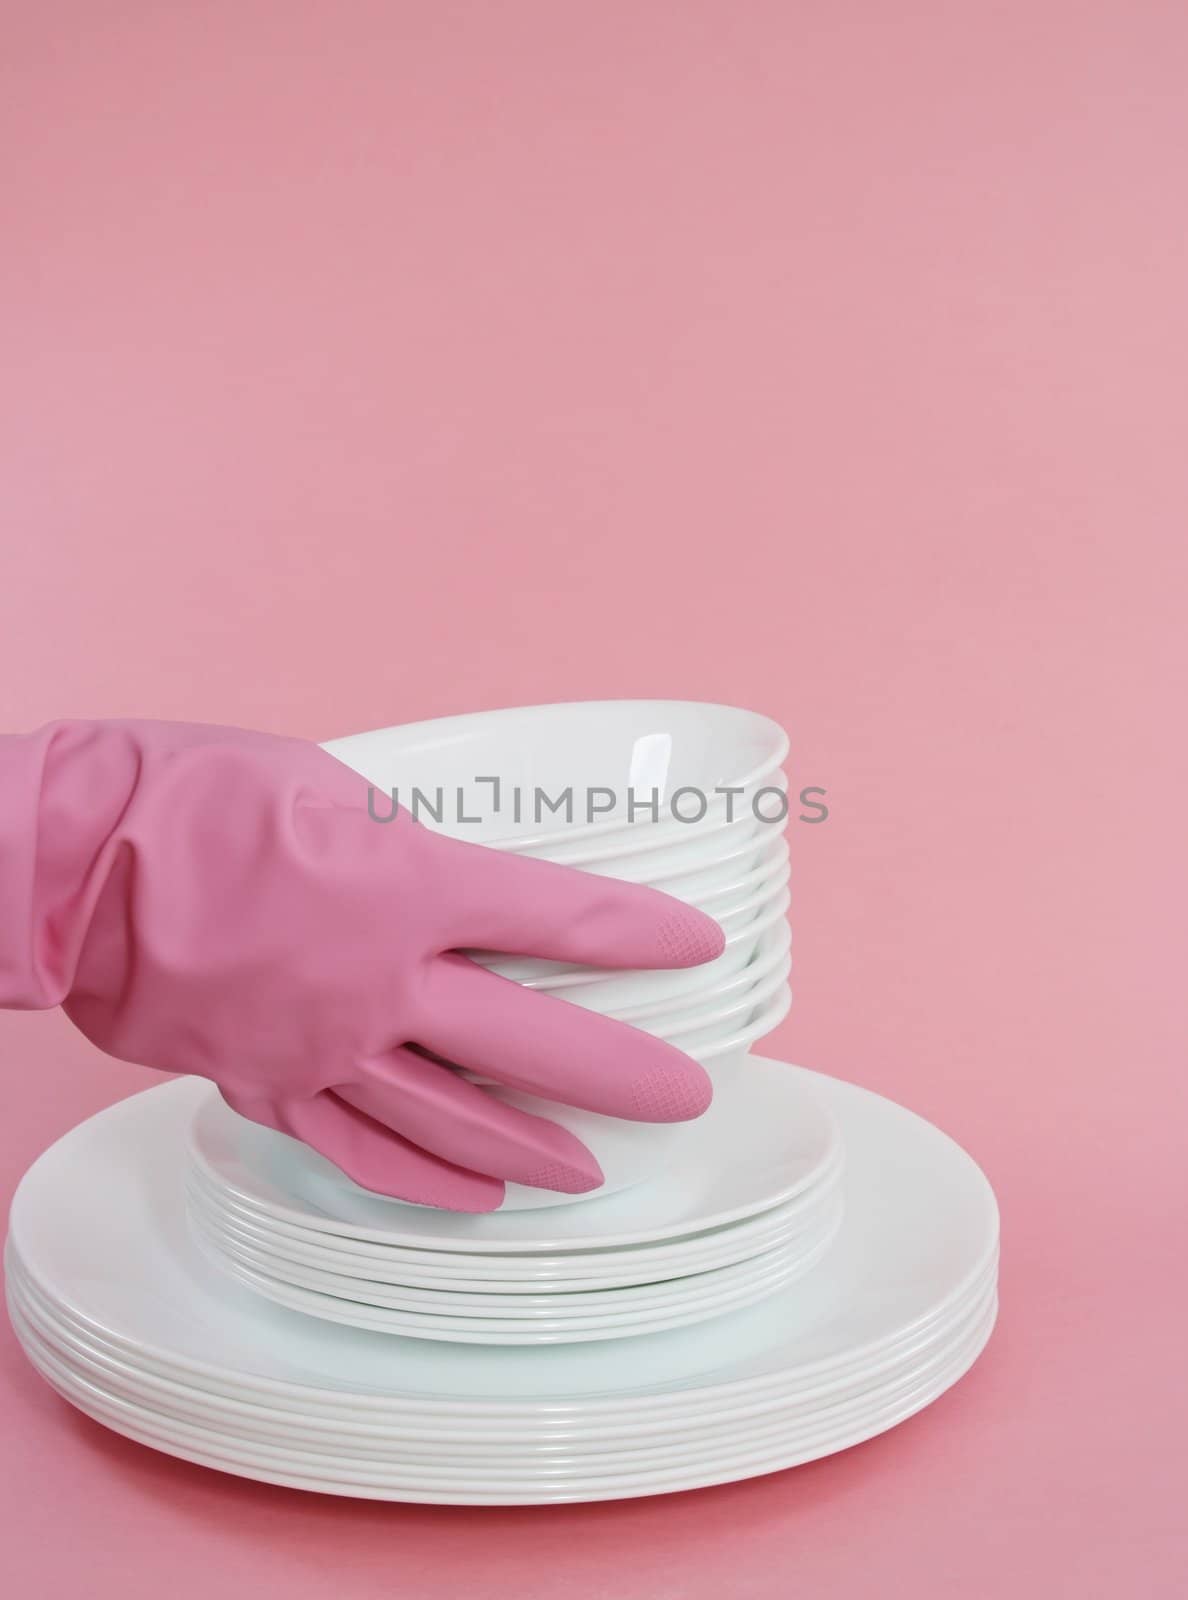 hand with pink glove holding white dishes